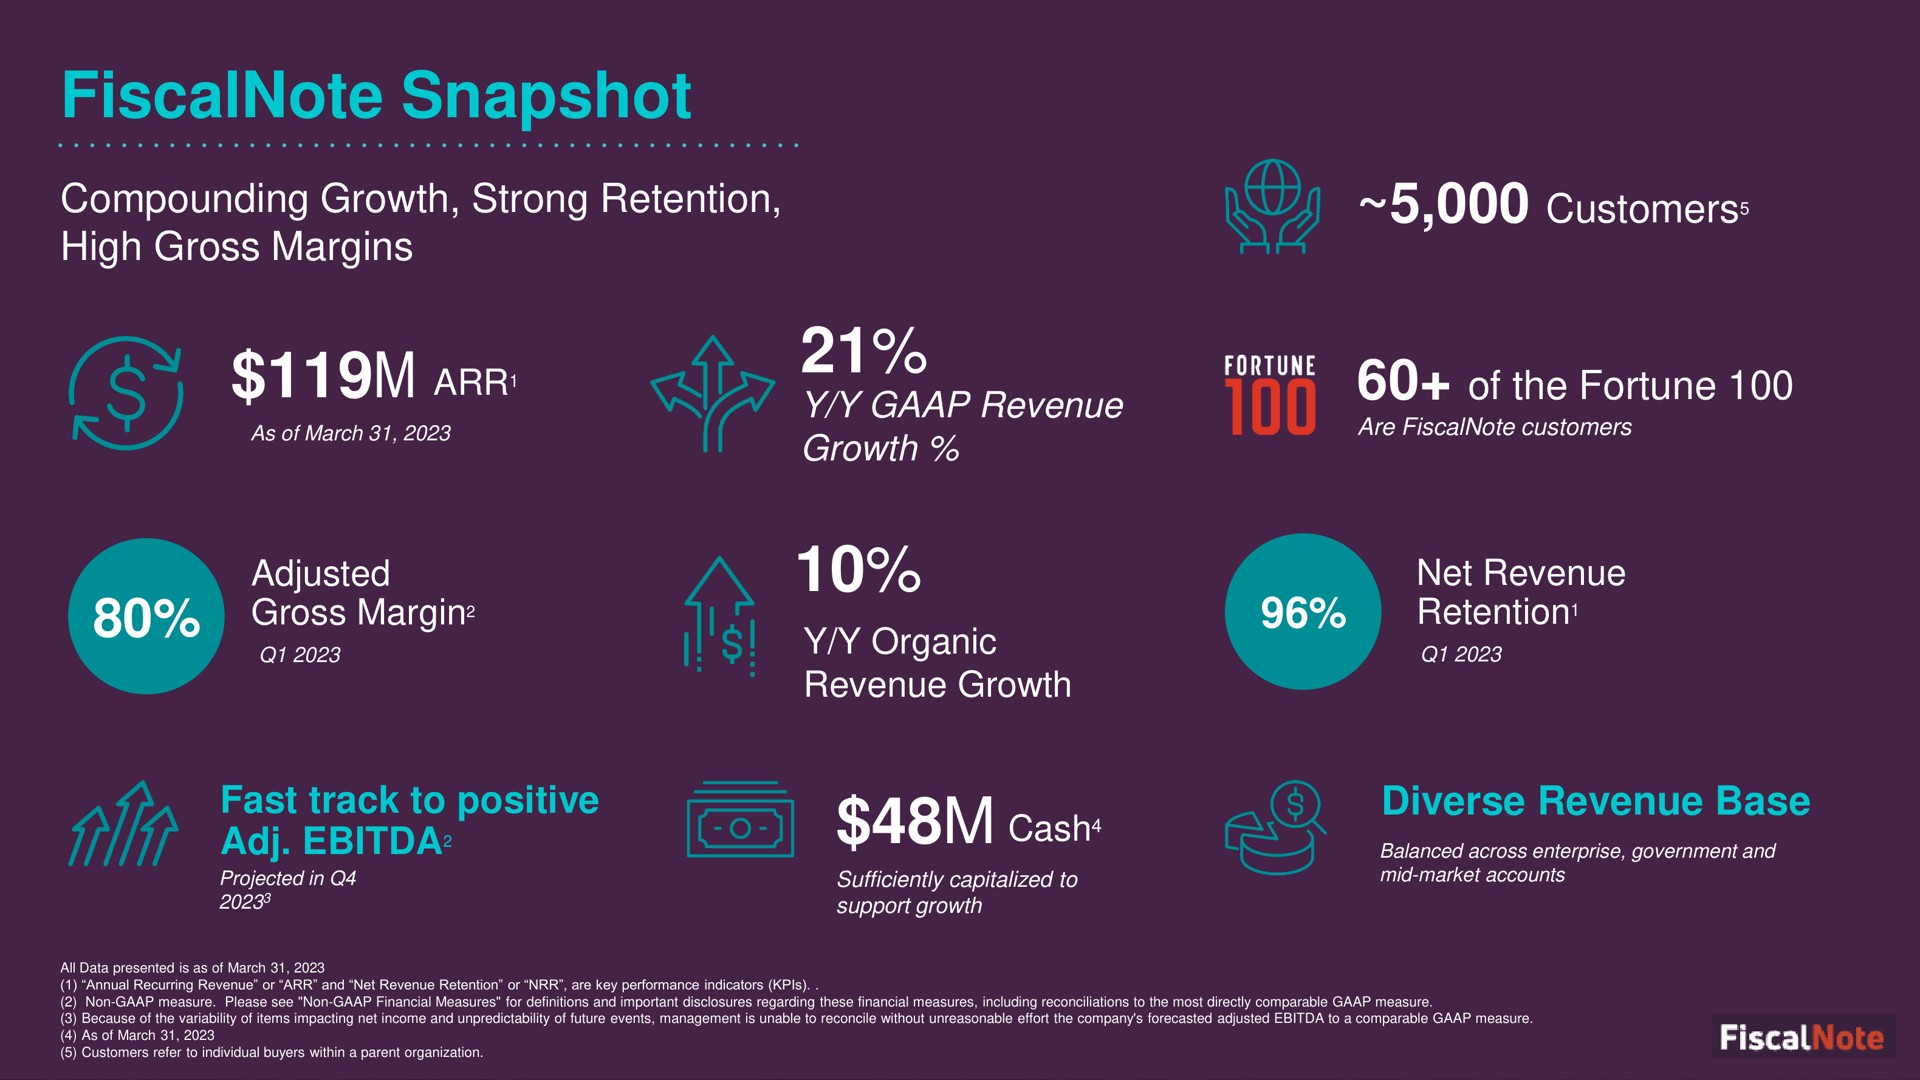 snapshot compounding growth strong retention high gross margins adjusted gross margin revenue growth organic revenue growth customers of the fortune net revenue retention fast track to positive cash diverse revenue base margin customers | FiscalNote